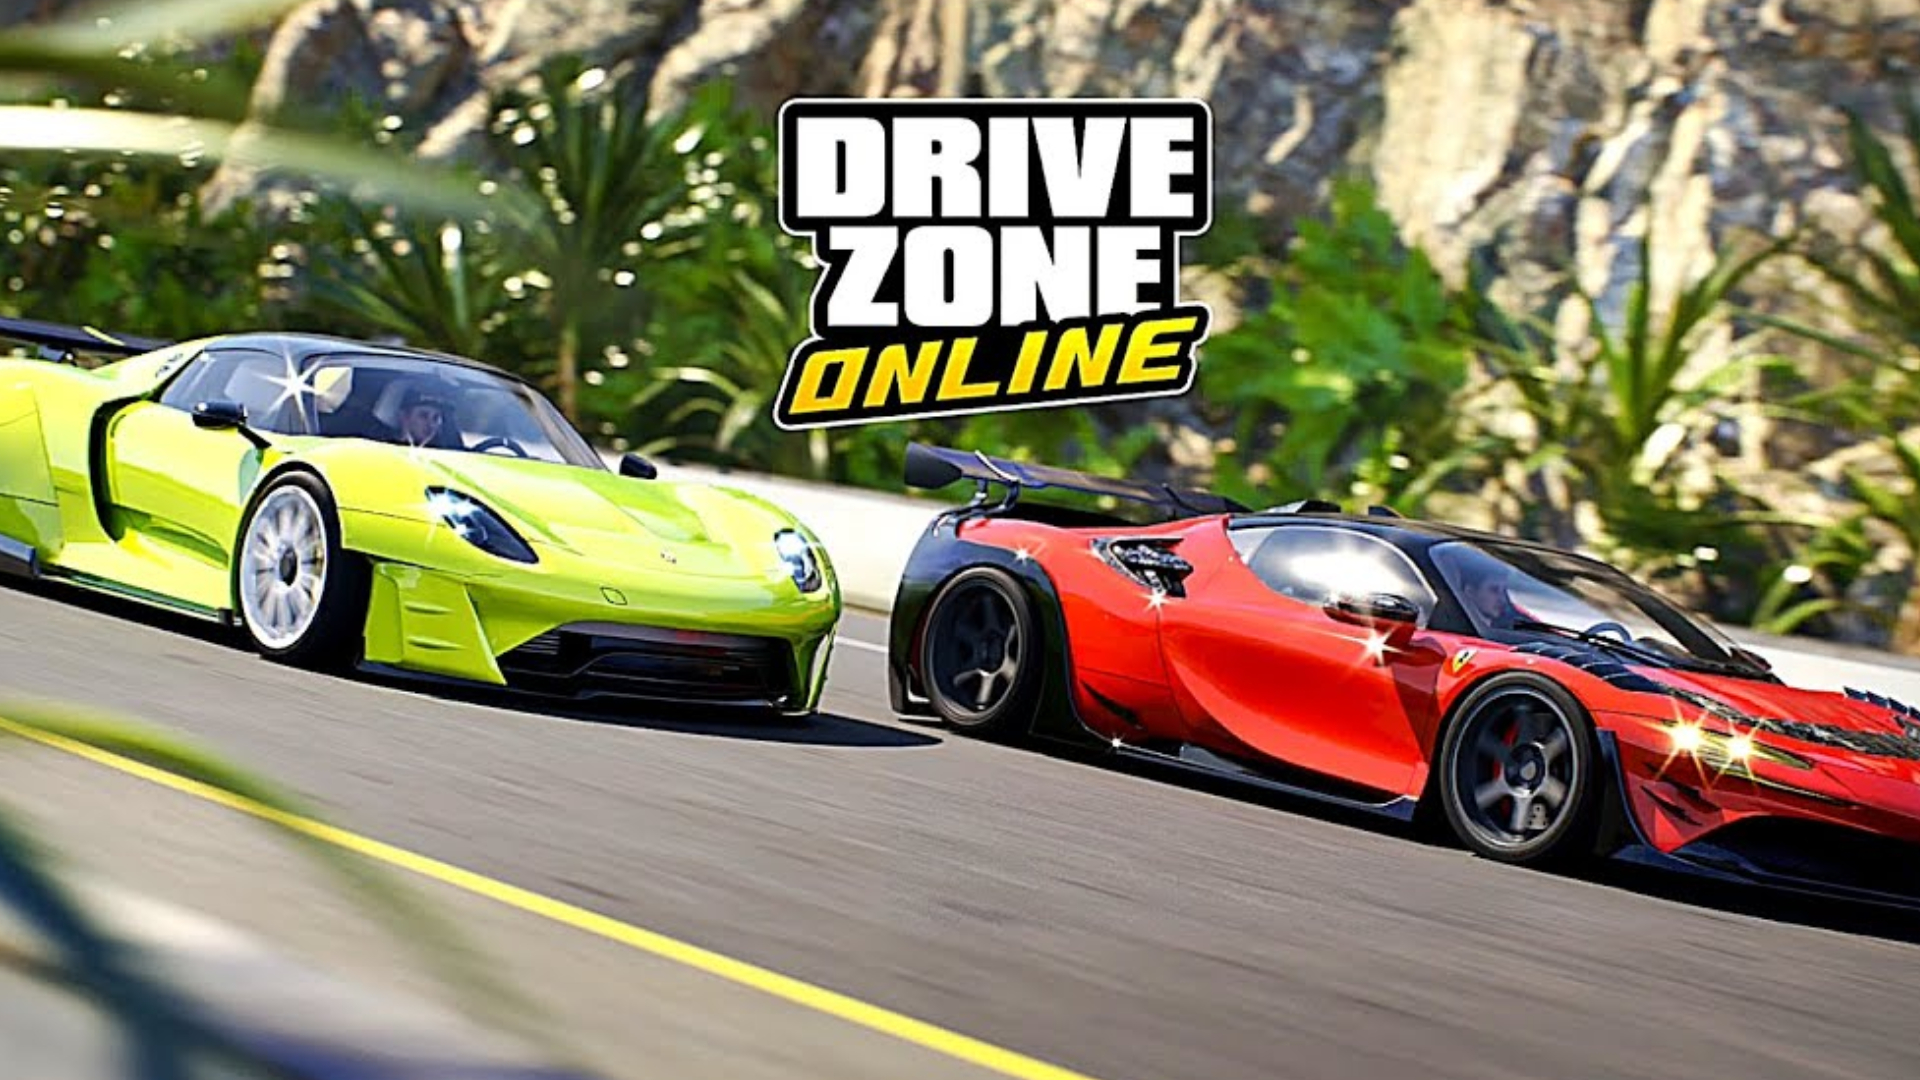 Drive Zone Online: A Thrilling Racing Experience on Mobile